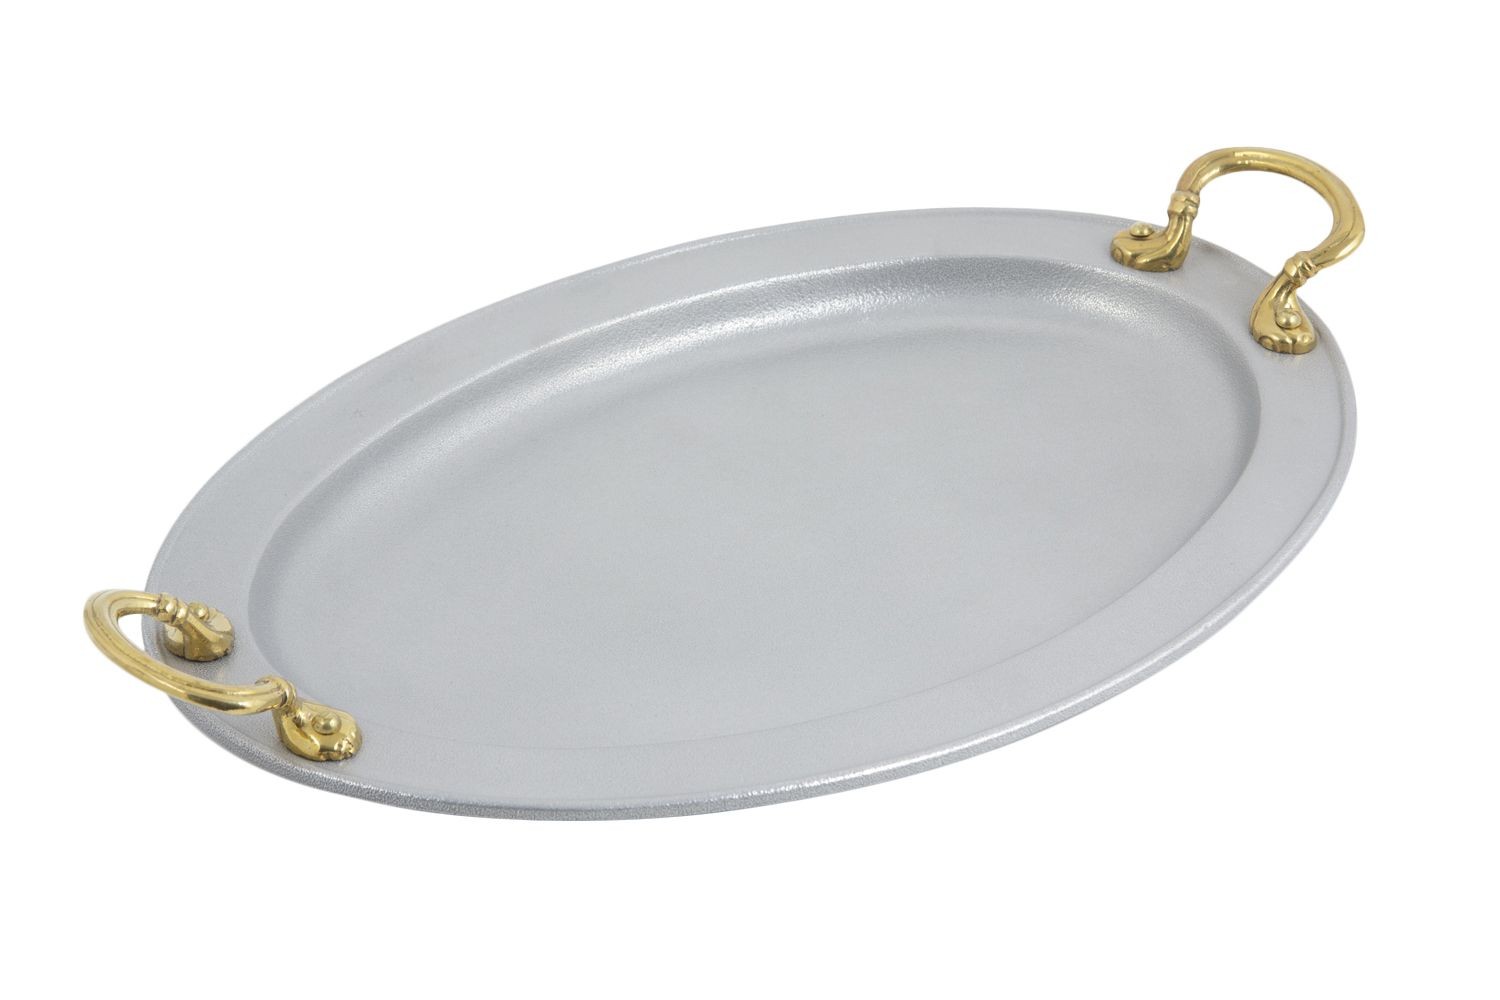 Bon Chef 2044HR'P Oval Platter with Round Handles, Pewter Glo 12 1/4" x 17"